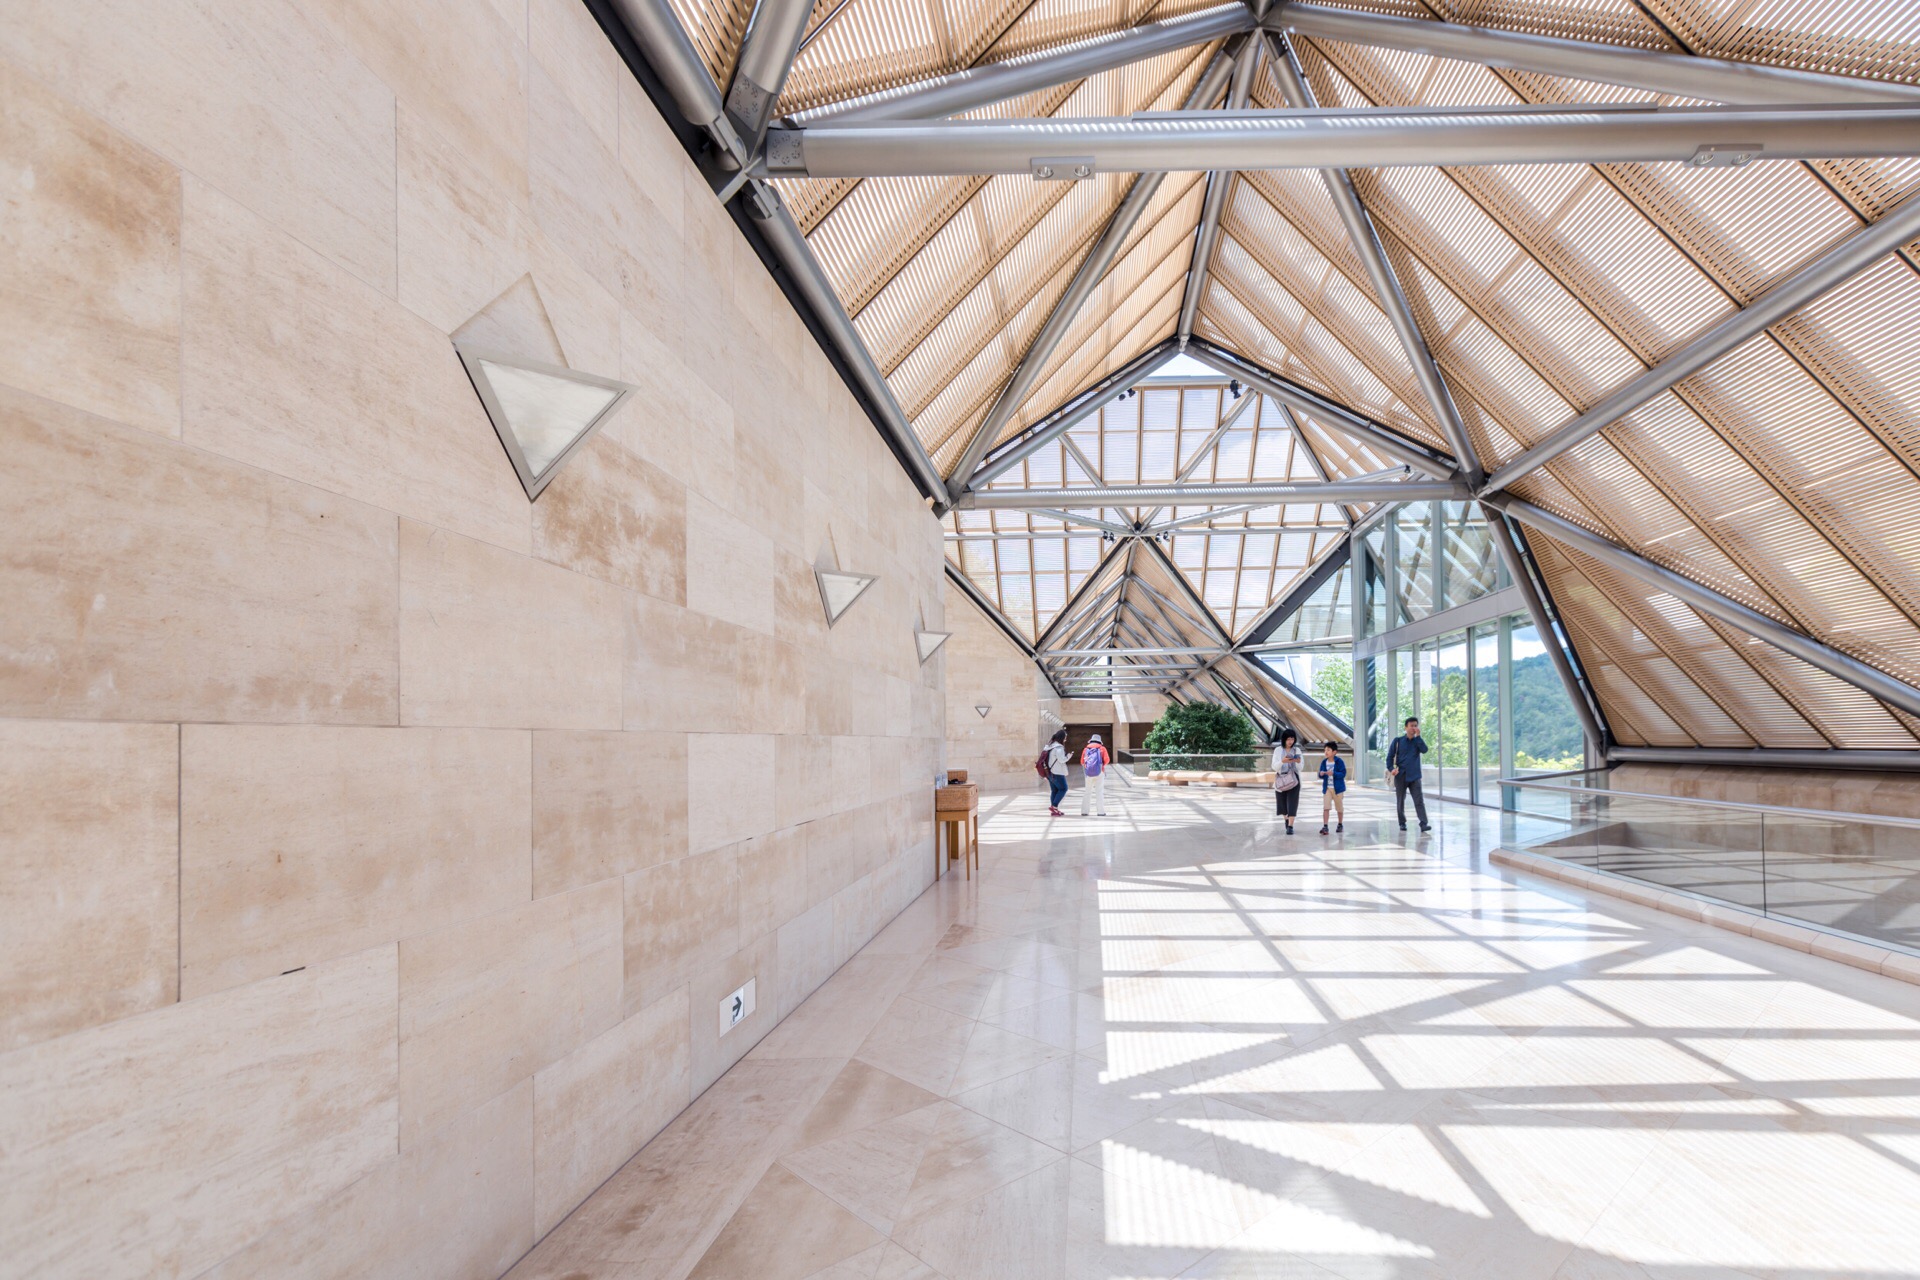 Miho Museum - All You Need to Know BEFORE You Go (with Photos)